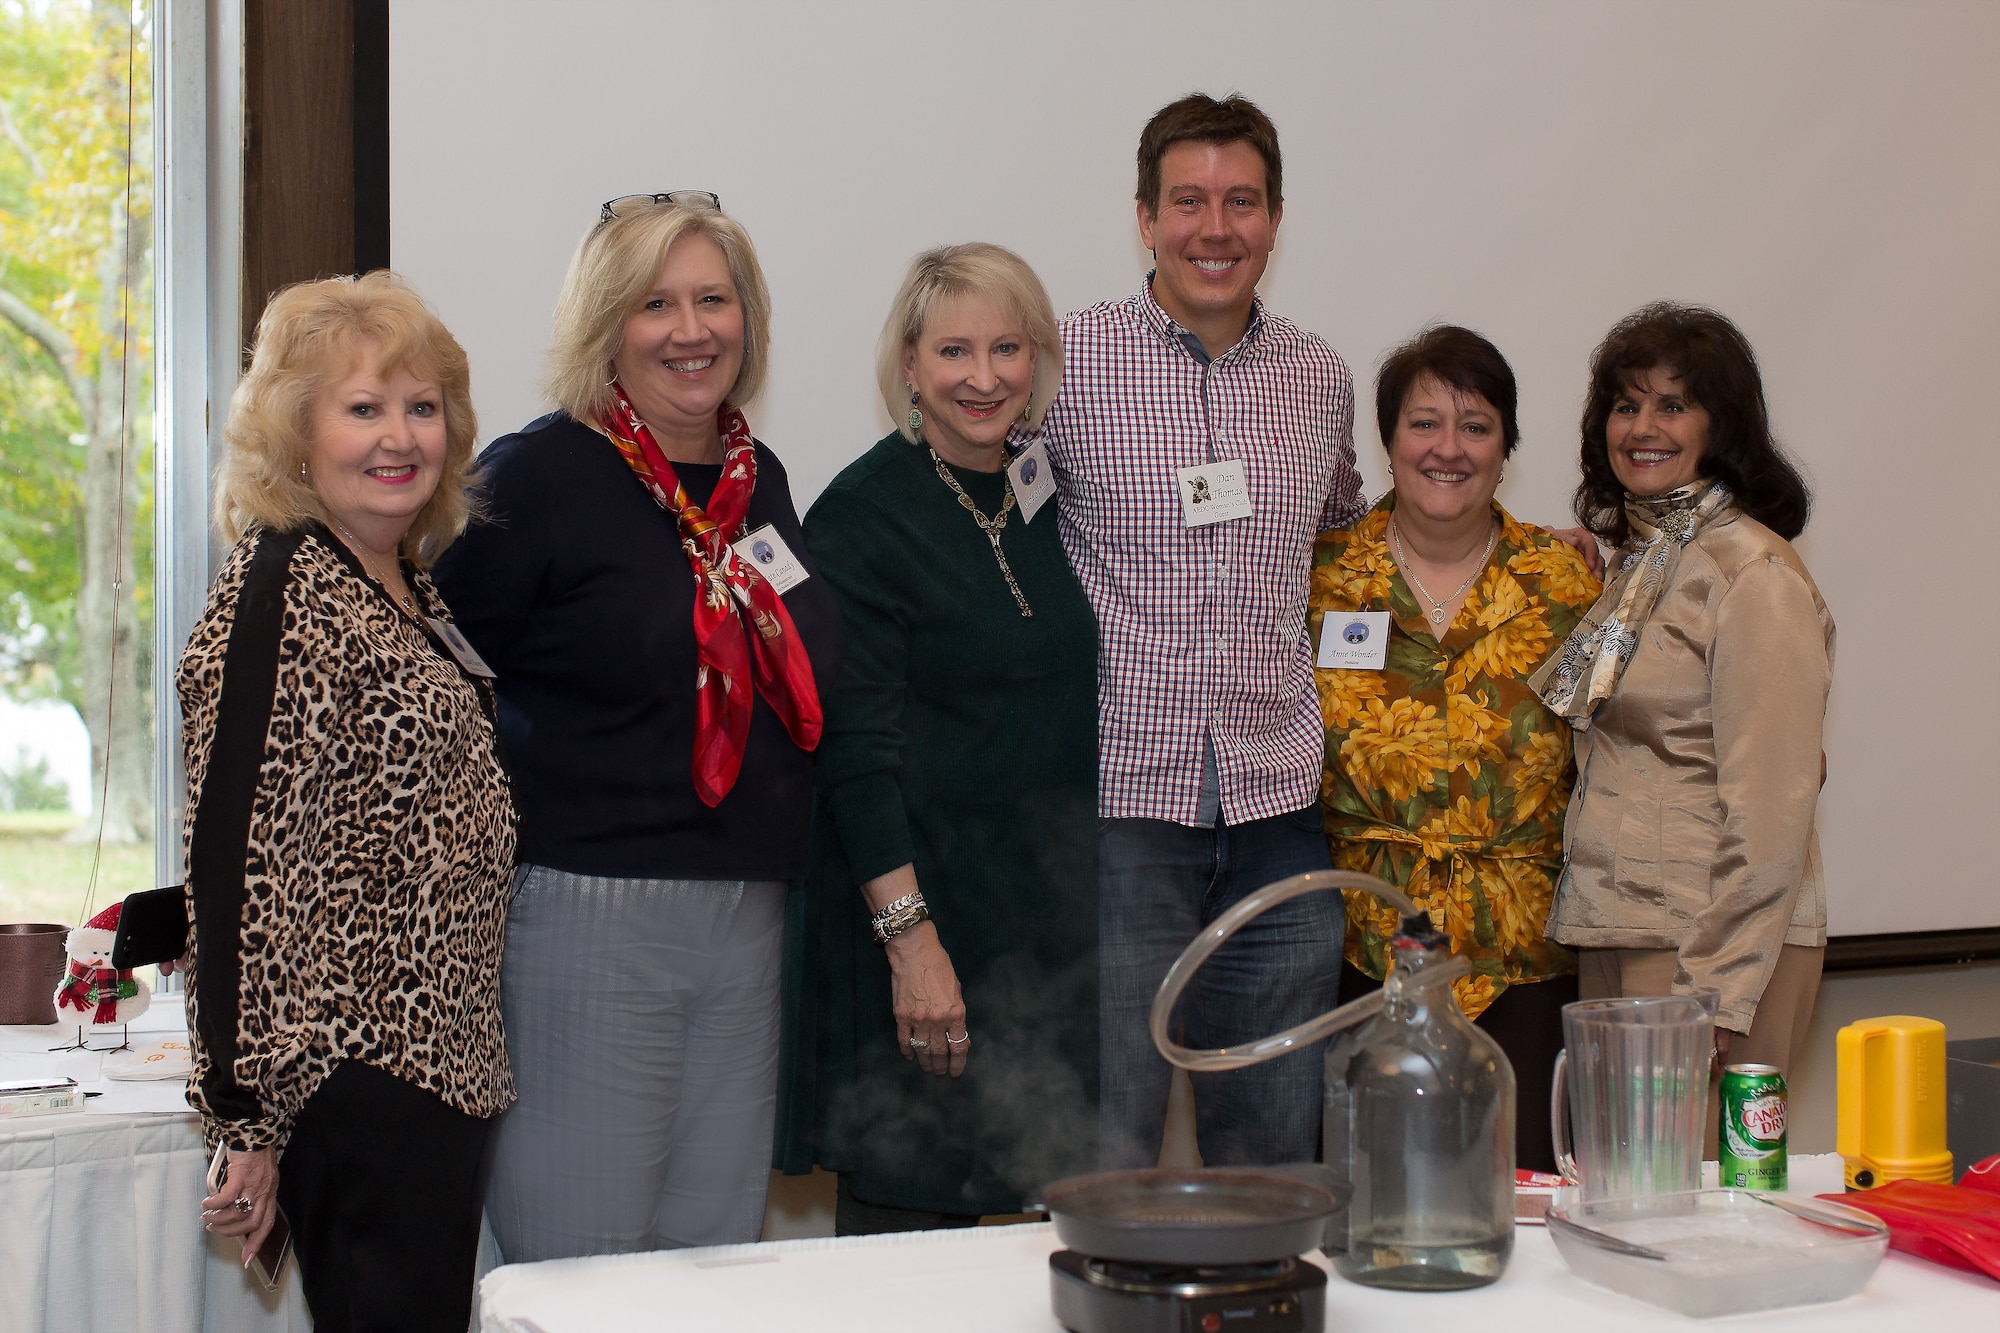 Meteorologist Dan Thomas, fourth from left, takes a moment to pose for a photo with the AEDC Woman’s Club members during his presentation at the AEDCWC meeting Nov. 2. Thomas is a meteorologist at WSMV/TV. Pictured left to right are Sande Hayes, Kate Canady, Suzie Schultz, Thomas, Anne Wonder and Violet Nauseef. (Courtesy photo)